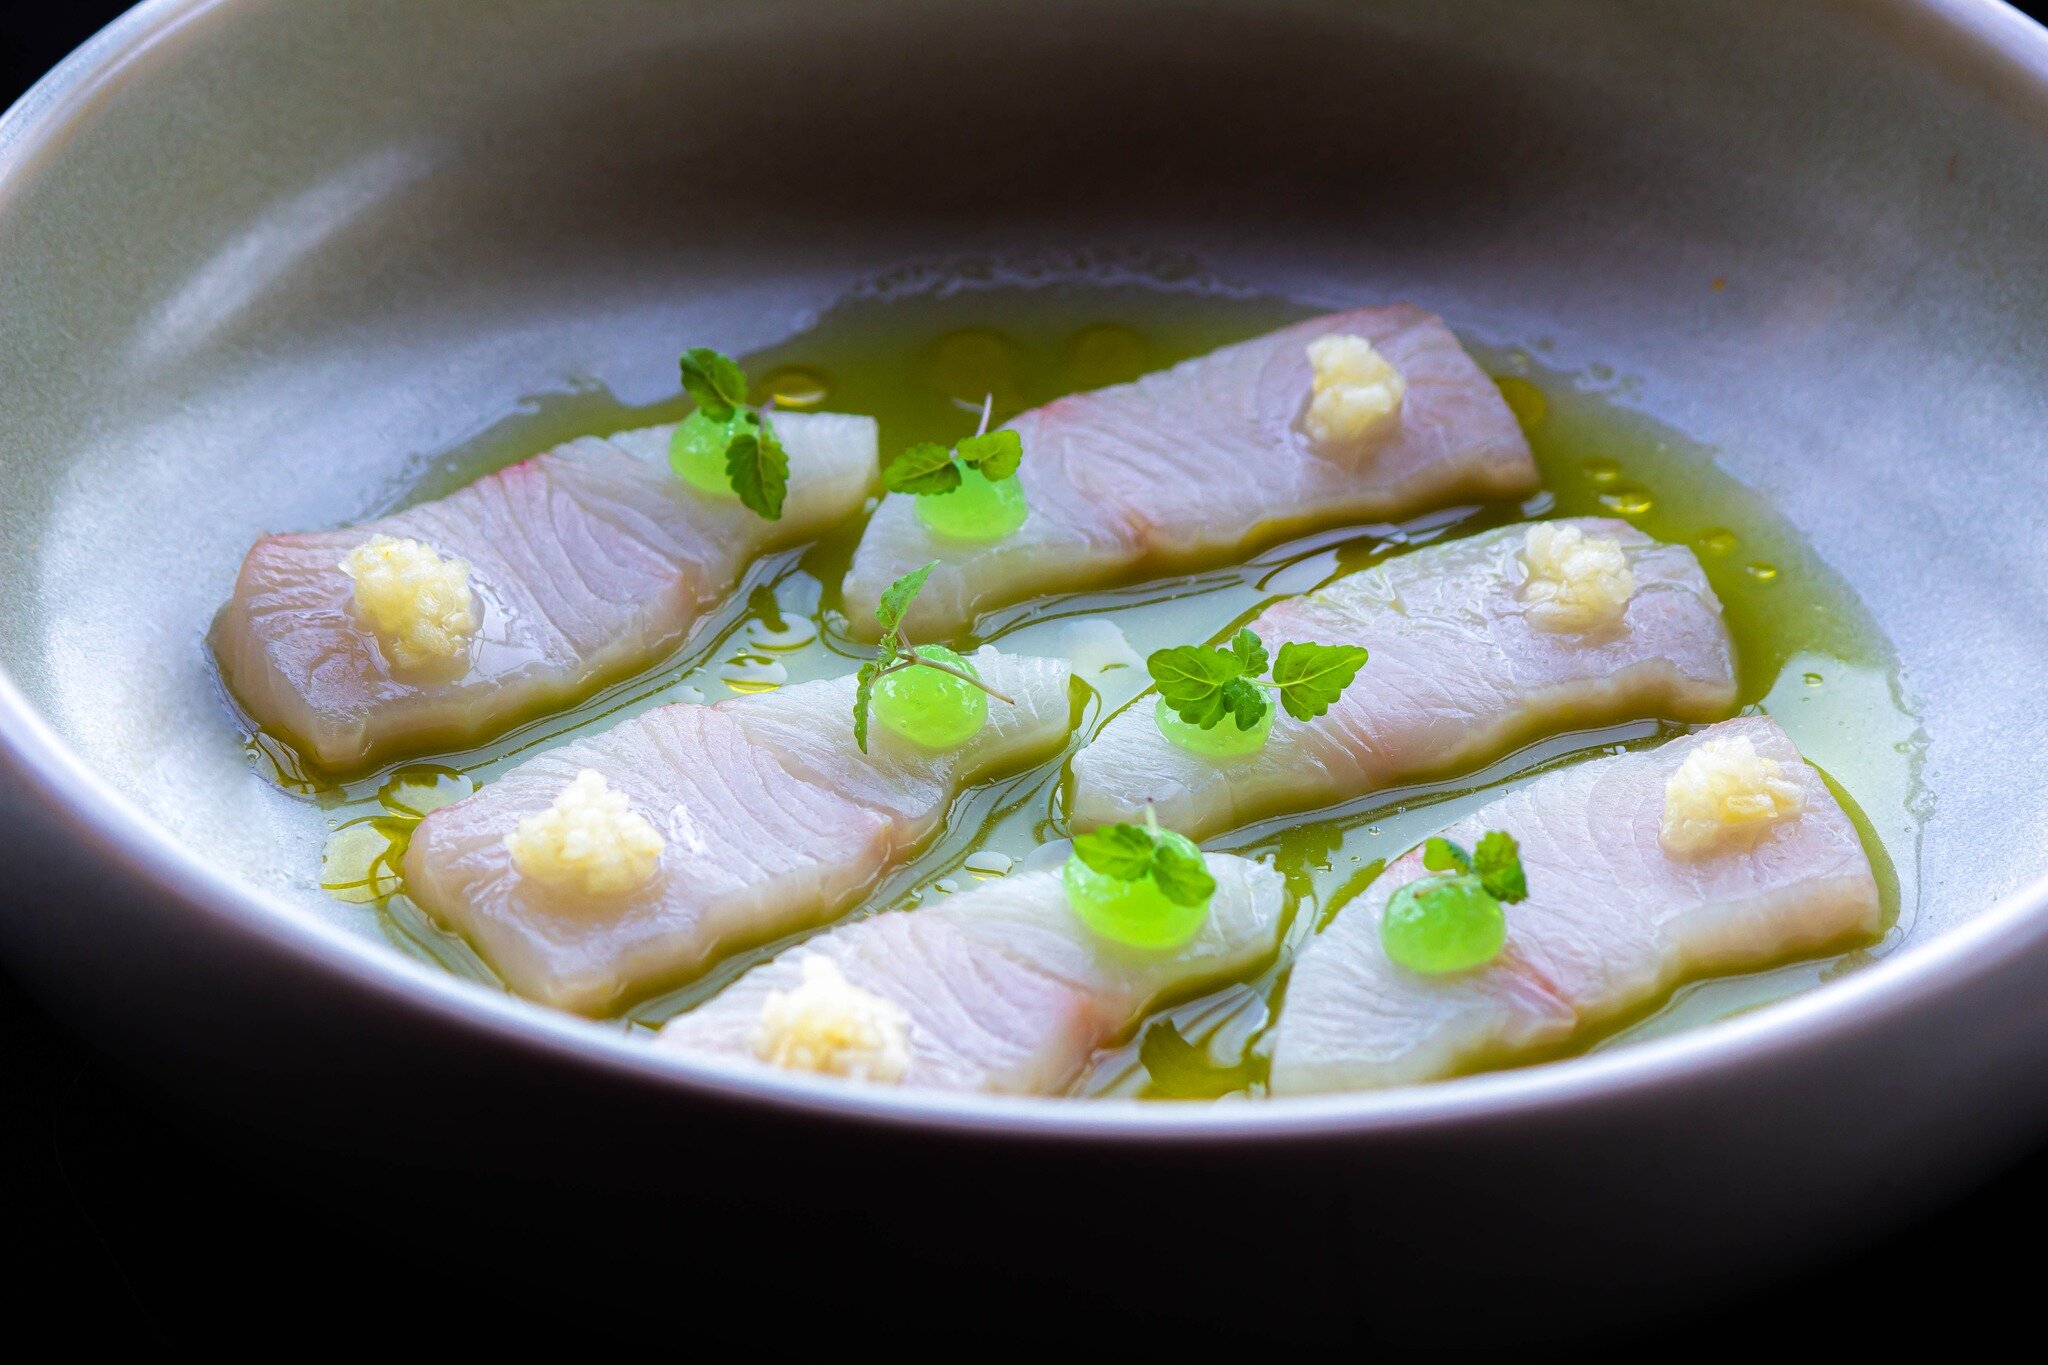 Our yellowtail kingfish special is still available from Mures Cambridge, retailing at $29.90kg!
.
We&rsquo;ll be open from 10am to 2pm today, so pop in and grab some of this delicious and versatile fish, available only while stocks last.
.
For dish i